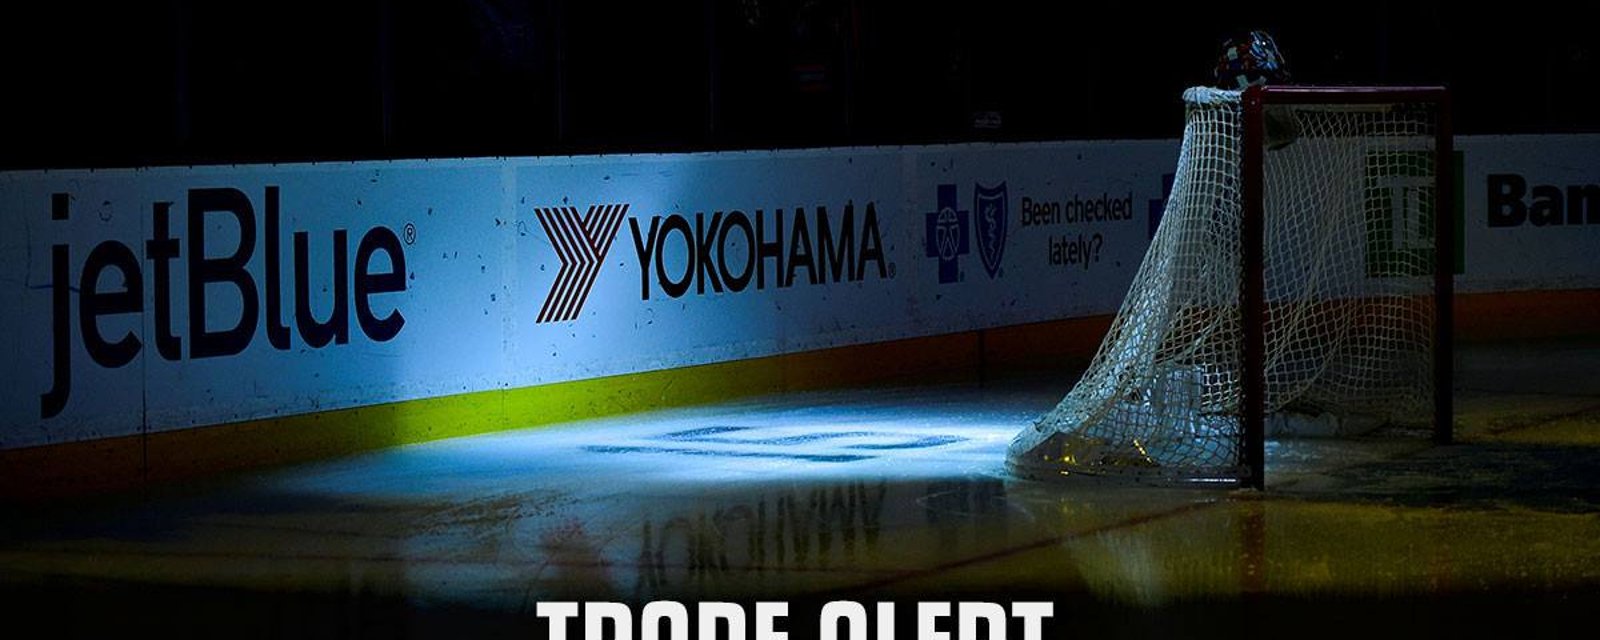 TRADE: Teams have swapped goaltender for University star in minor trade.